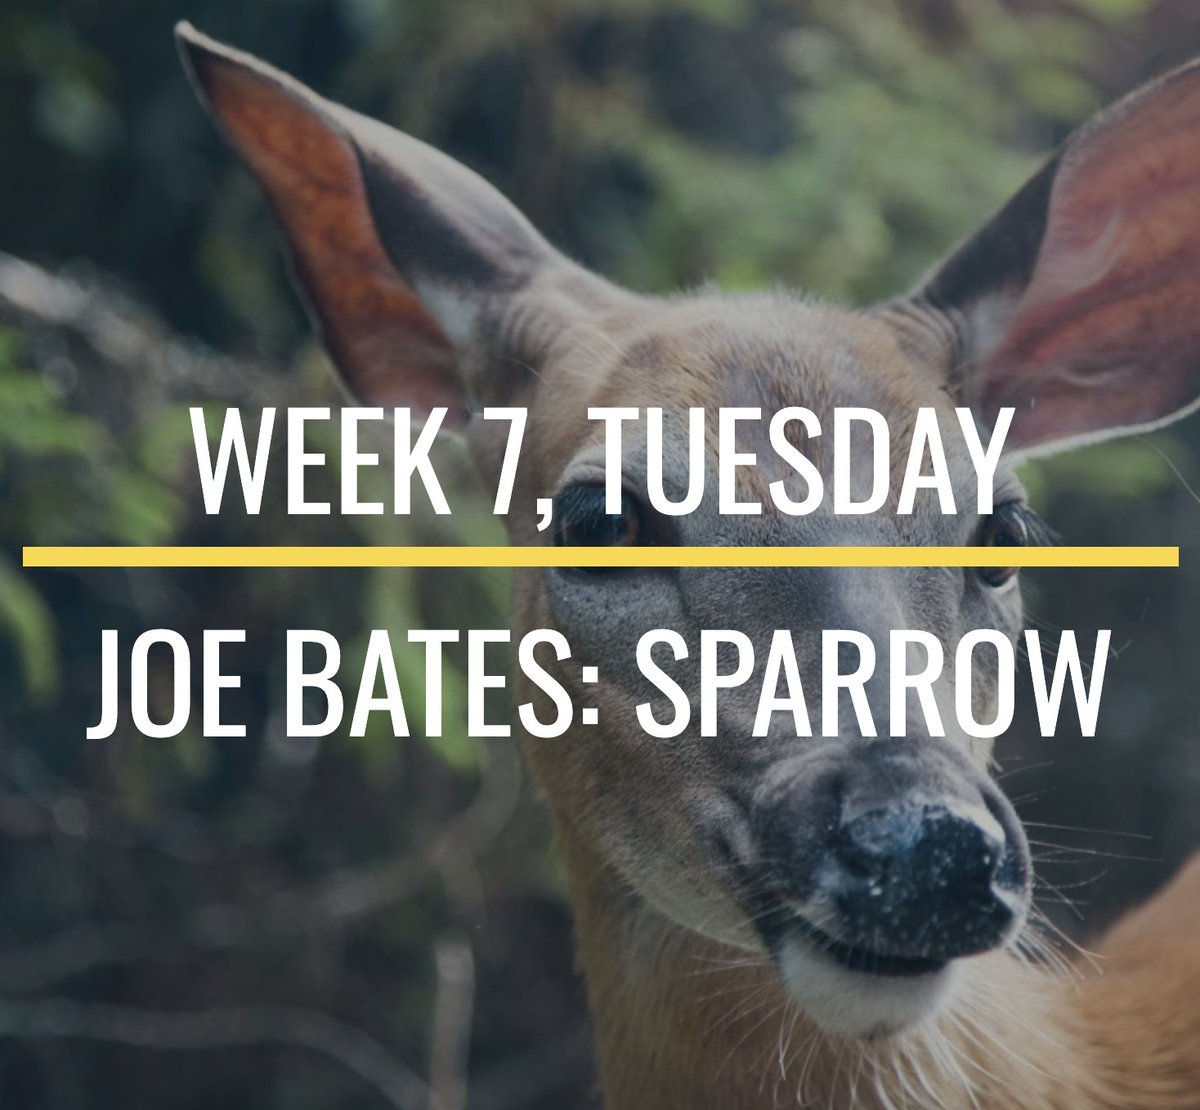 🎧🎶🎧#55daysoflistening🎧🎶🎧 Week 7, Tuesday & @Music_at_York's own @josephmbates today, with 'Sparrow', commissioned in 2020 by @RiotEns. Small bird, big instrument. Incidentally, a good week for Joe: PhD submitted, new CD @TerraInvisus, & @the_bsr support for Hyasynth!